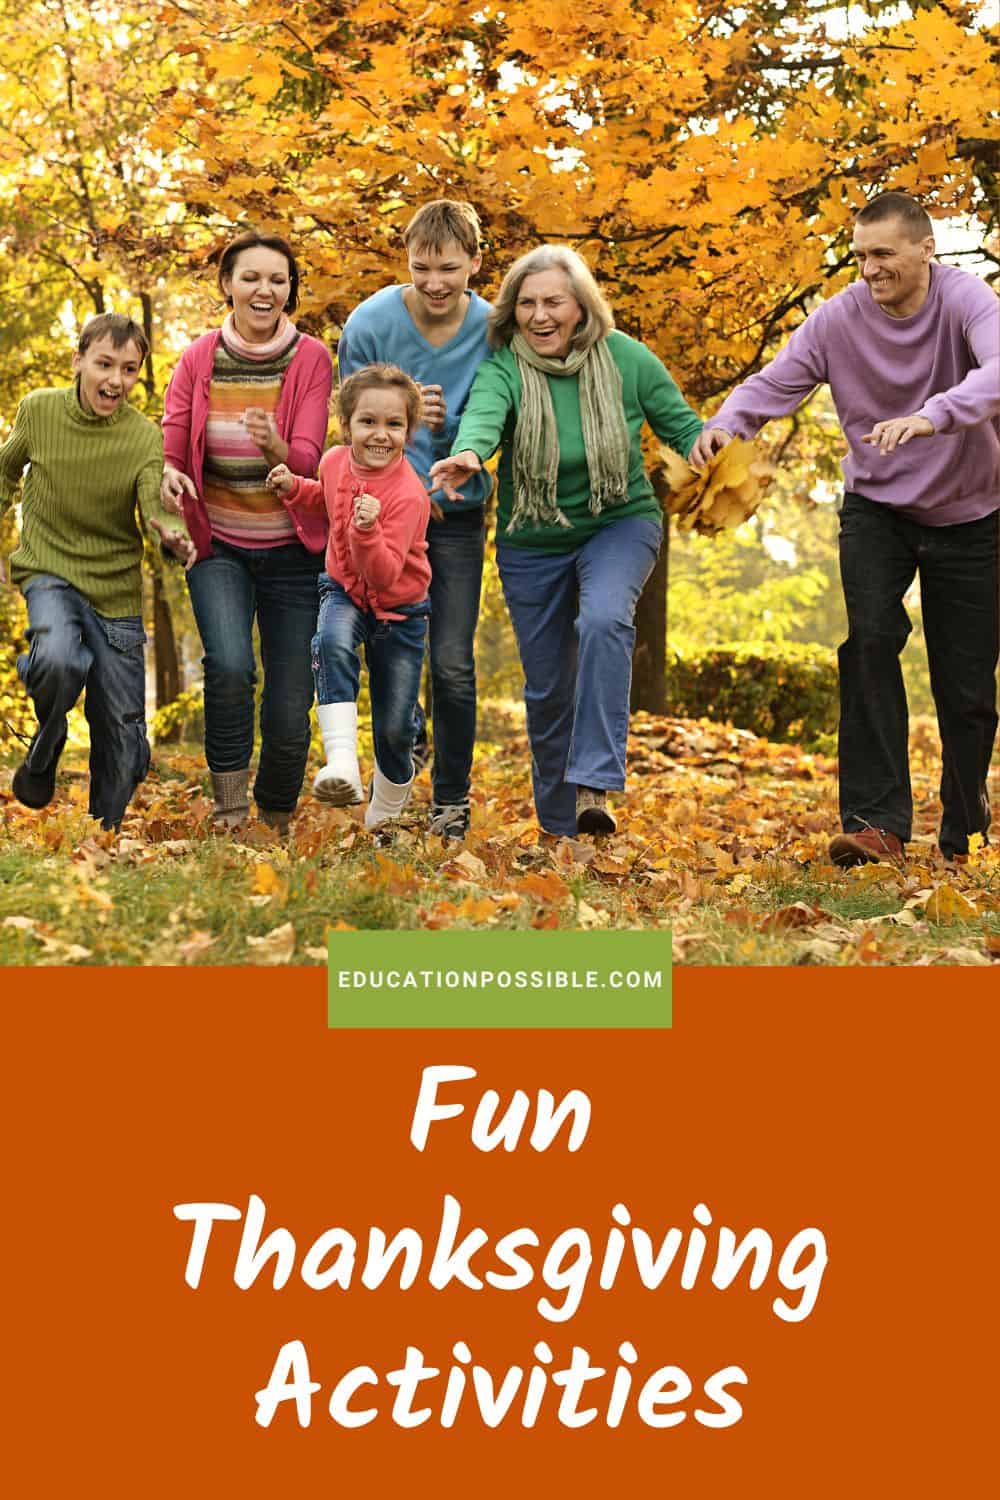 Fun Thanksgiving Activities for the Whole Family to Enjoy